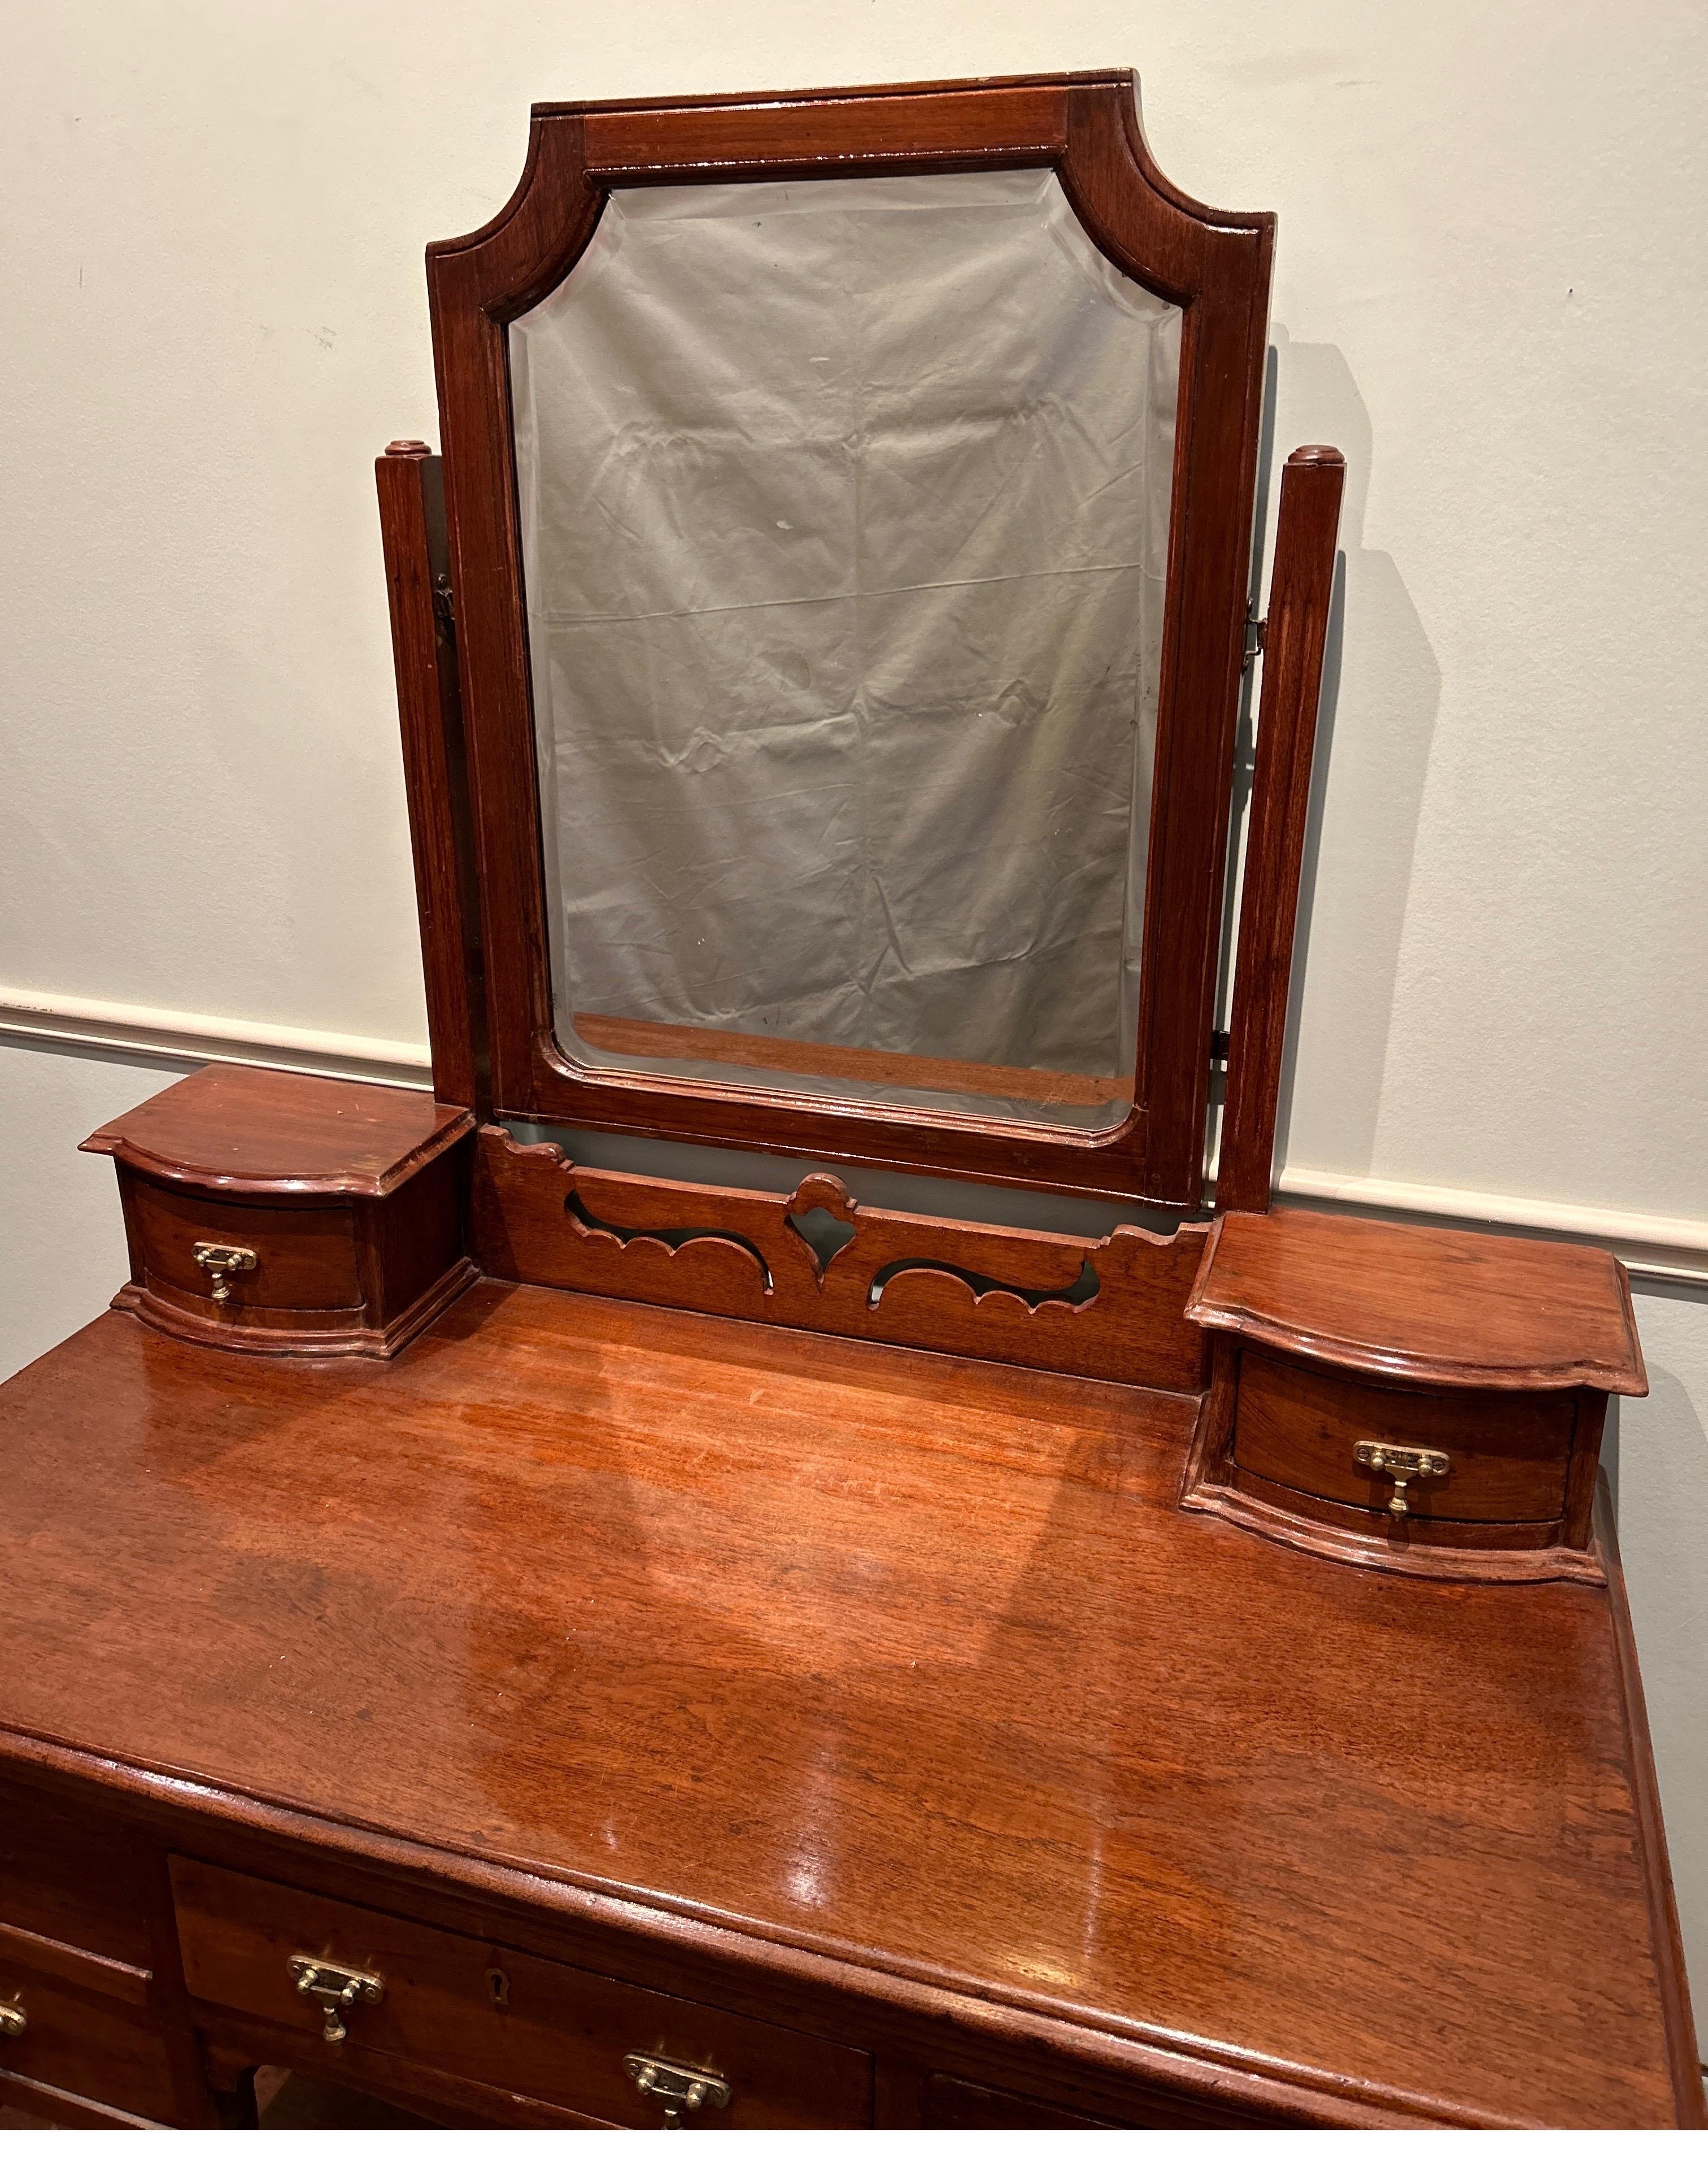 Art Nouveau Teak Hand Carved Vanity Cum Writing Table With Drawers & Brass Pulls In Good Condition For Sale In Vancouver, British Columbia